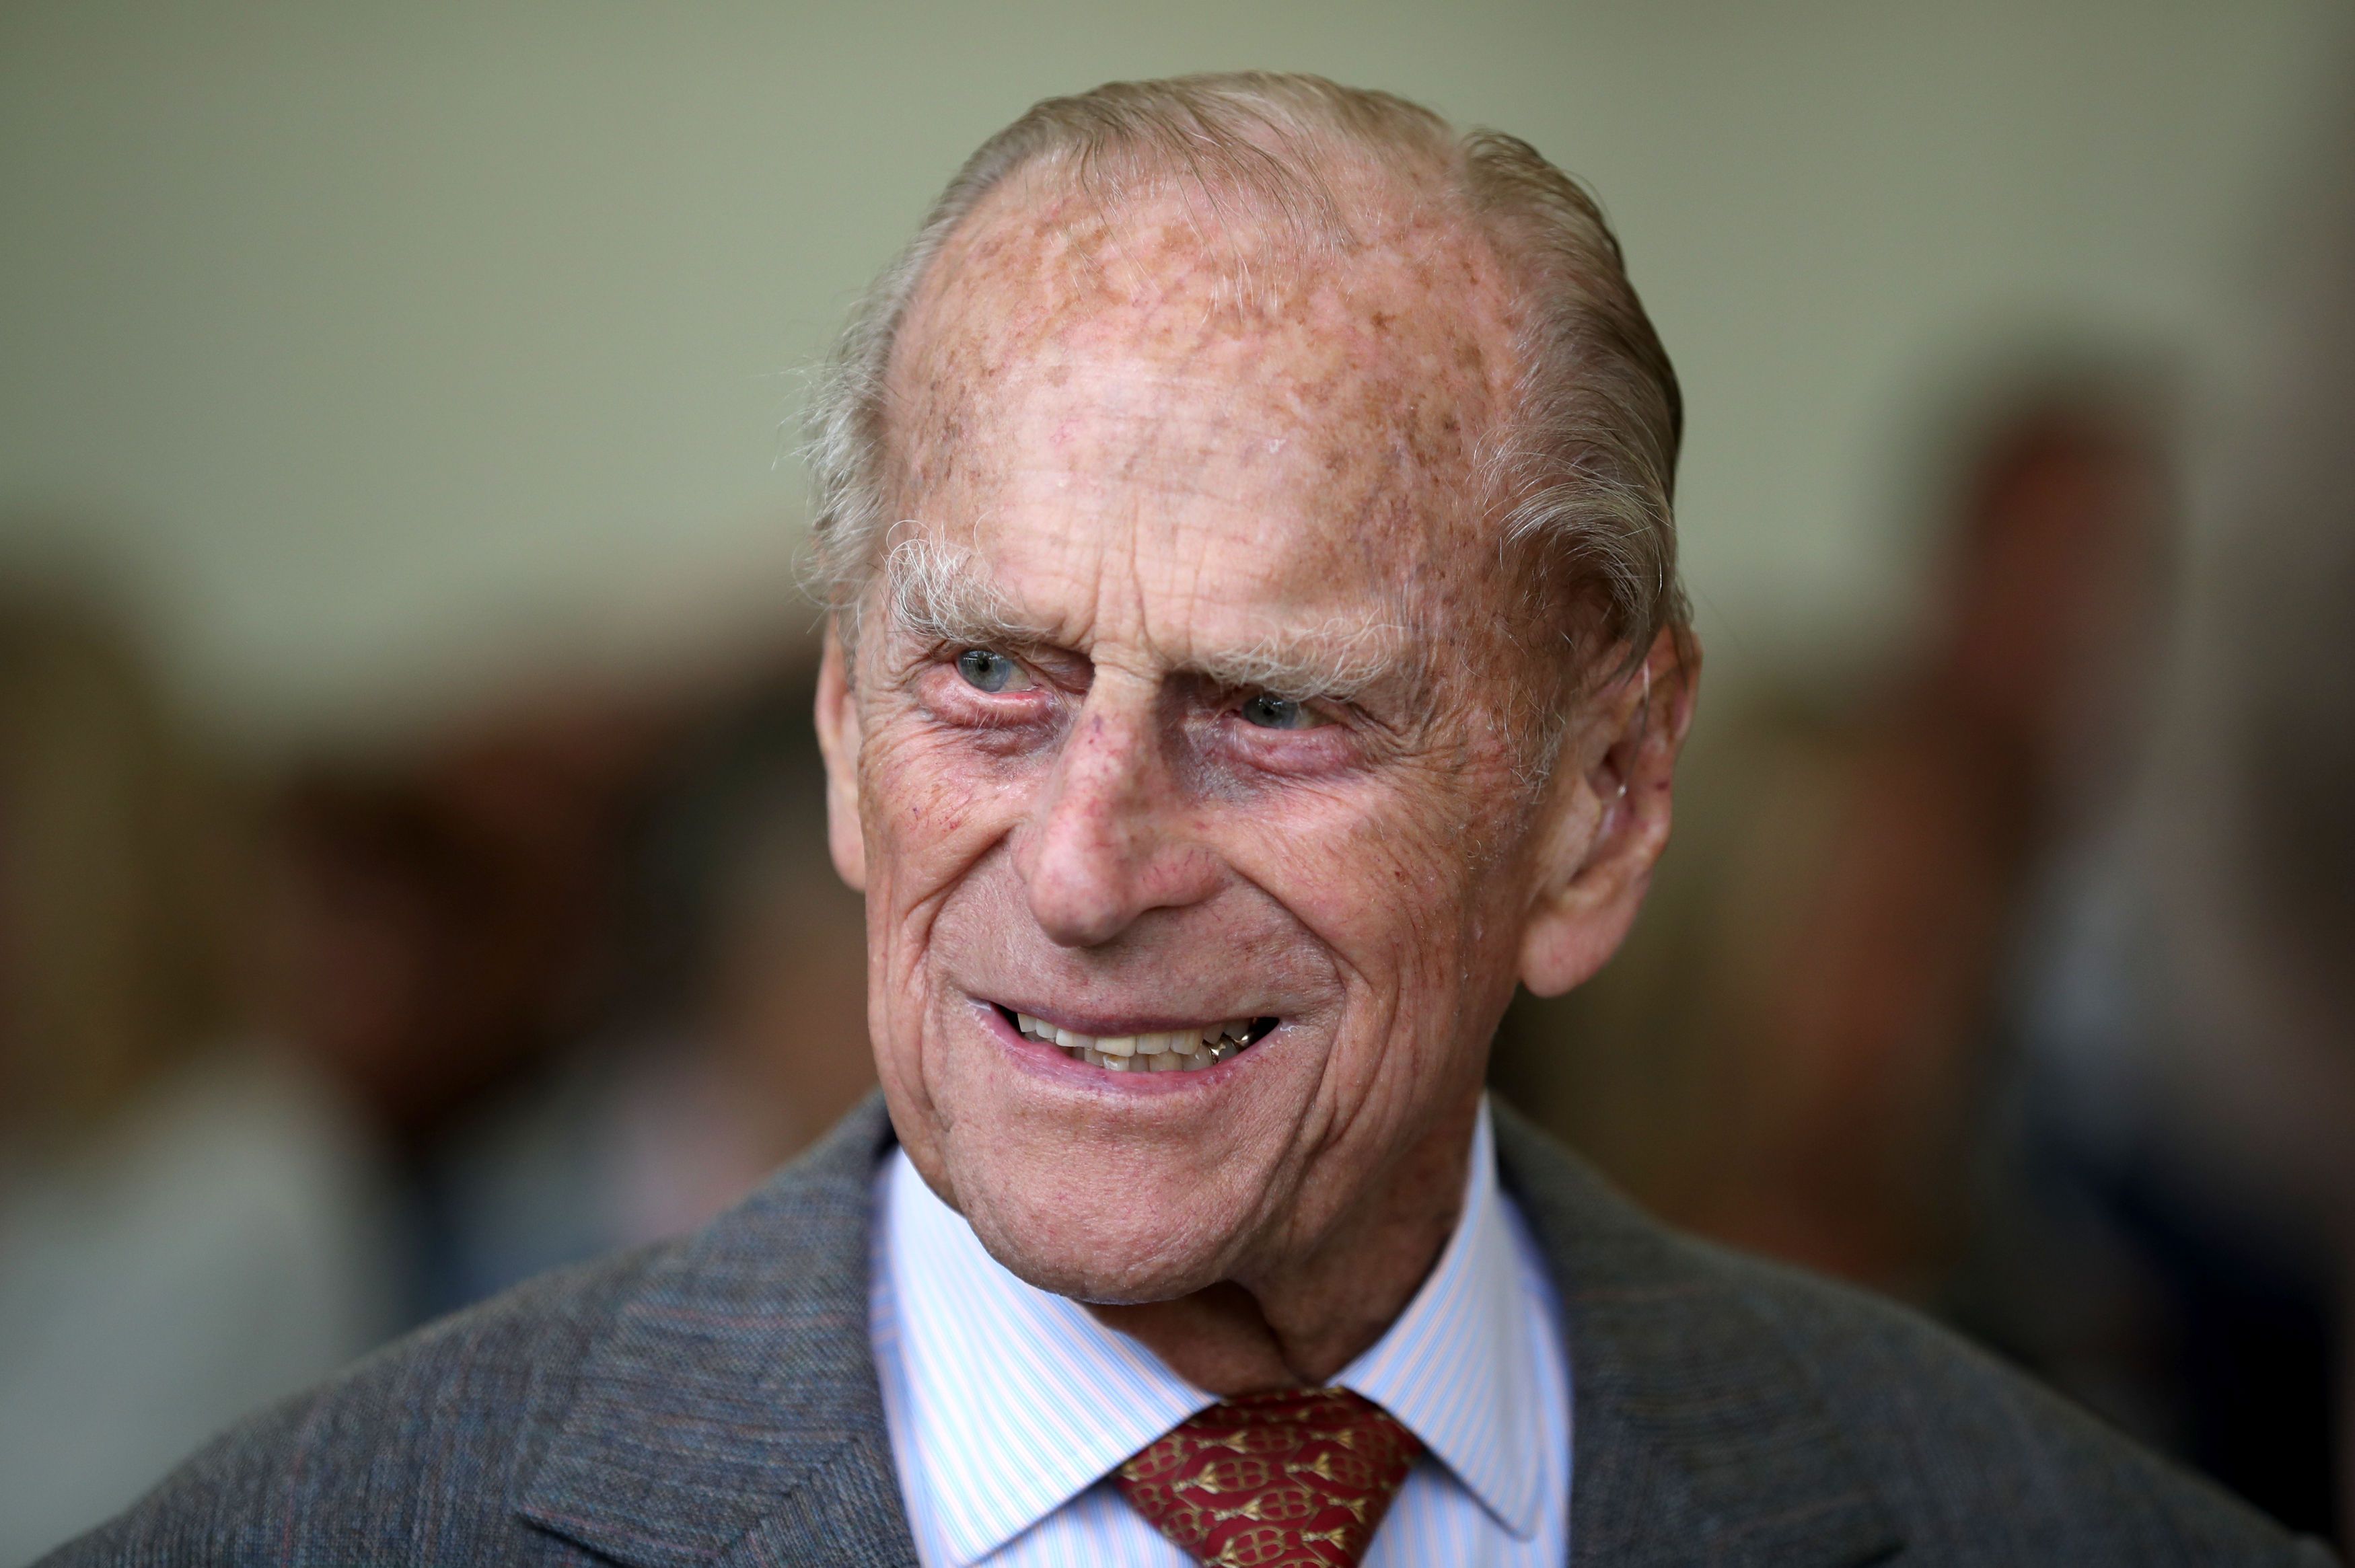 The Duke of Edinburgh at the Presentation Reception for The Duke of Edinburgh Gold Award holders at the Palace of Holyroodhouse on July 6, 2017 in Edinburgh, Scotland. | Photo: Getty Images